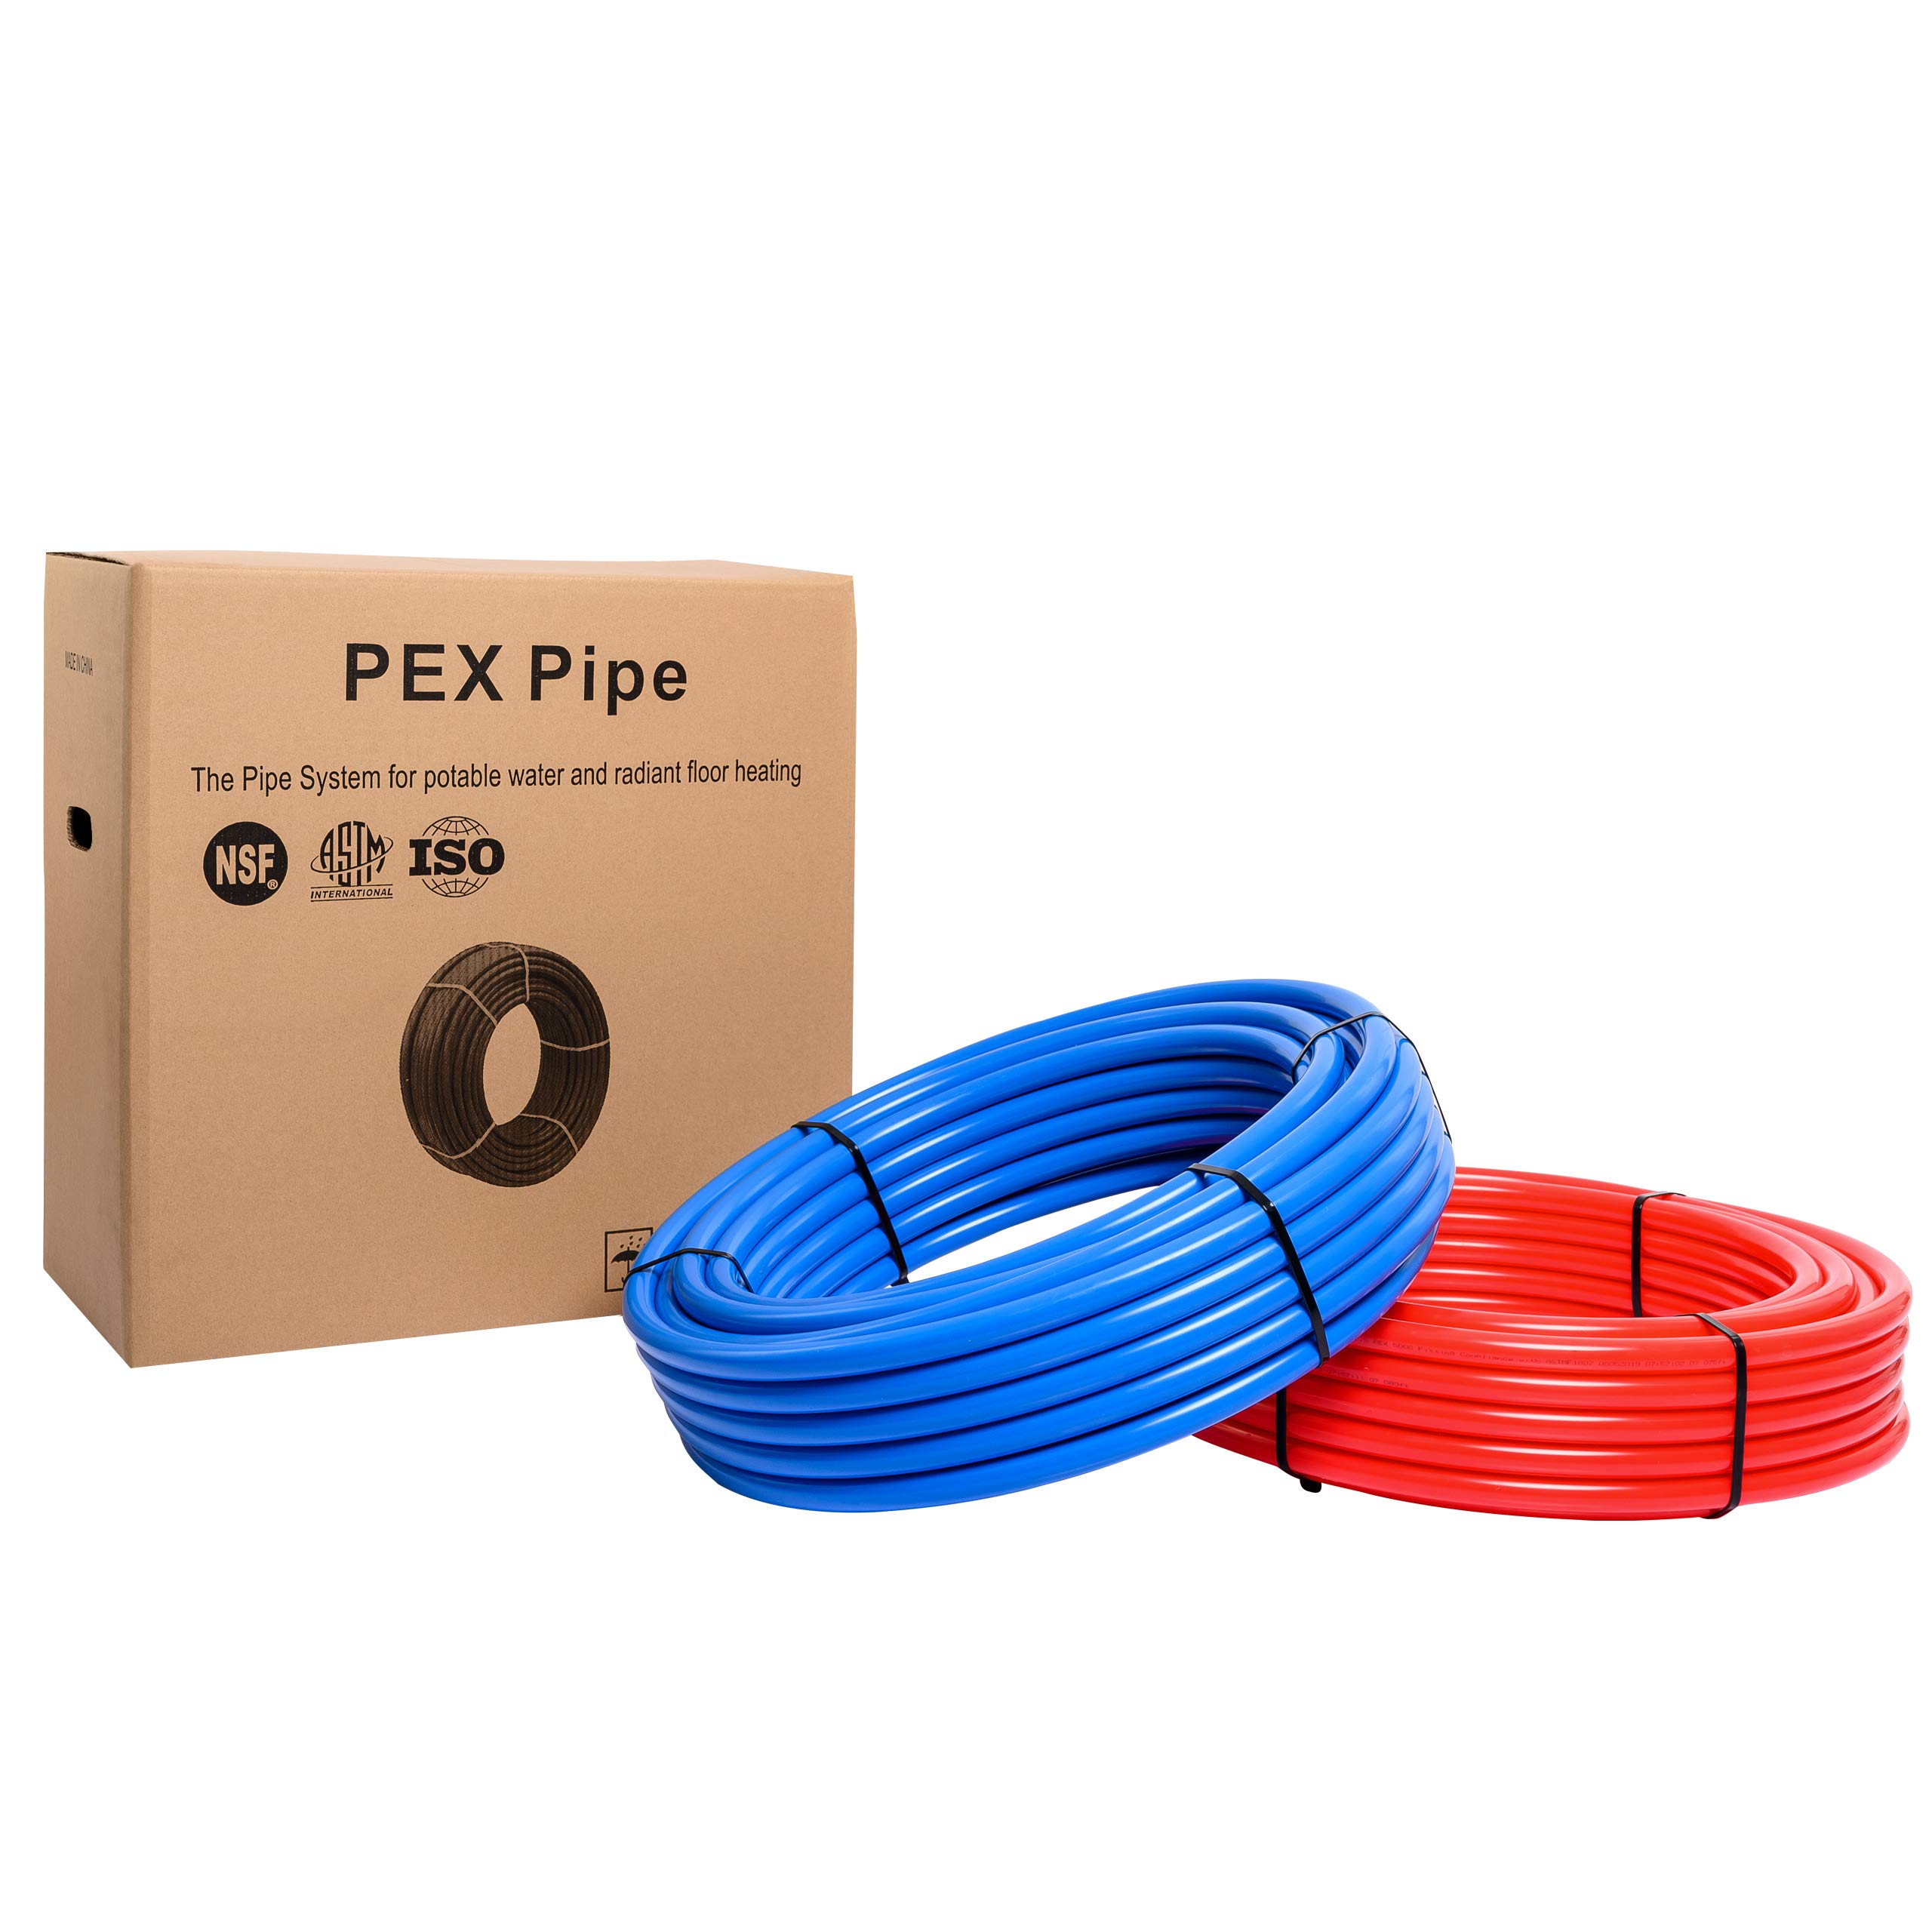 Pex-b Pipe1/2 Inch(2 x75 ft=150 ft, Red & Blue) Fitting DIY Kit, Crimp Fitting, Clamp Tool, Clamps Cutter &Heavy-Duty Canvas Bags